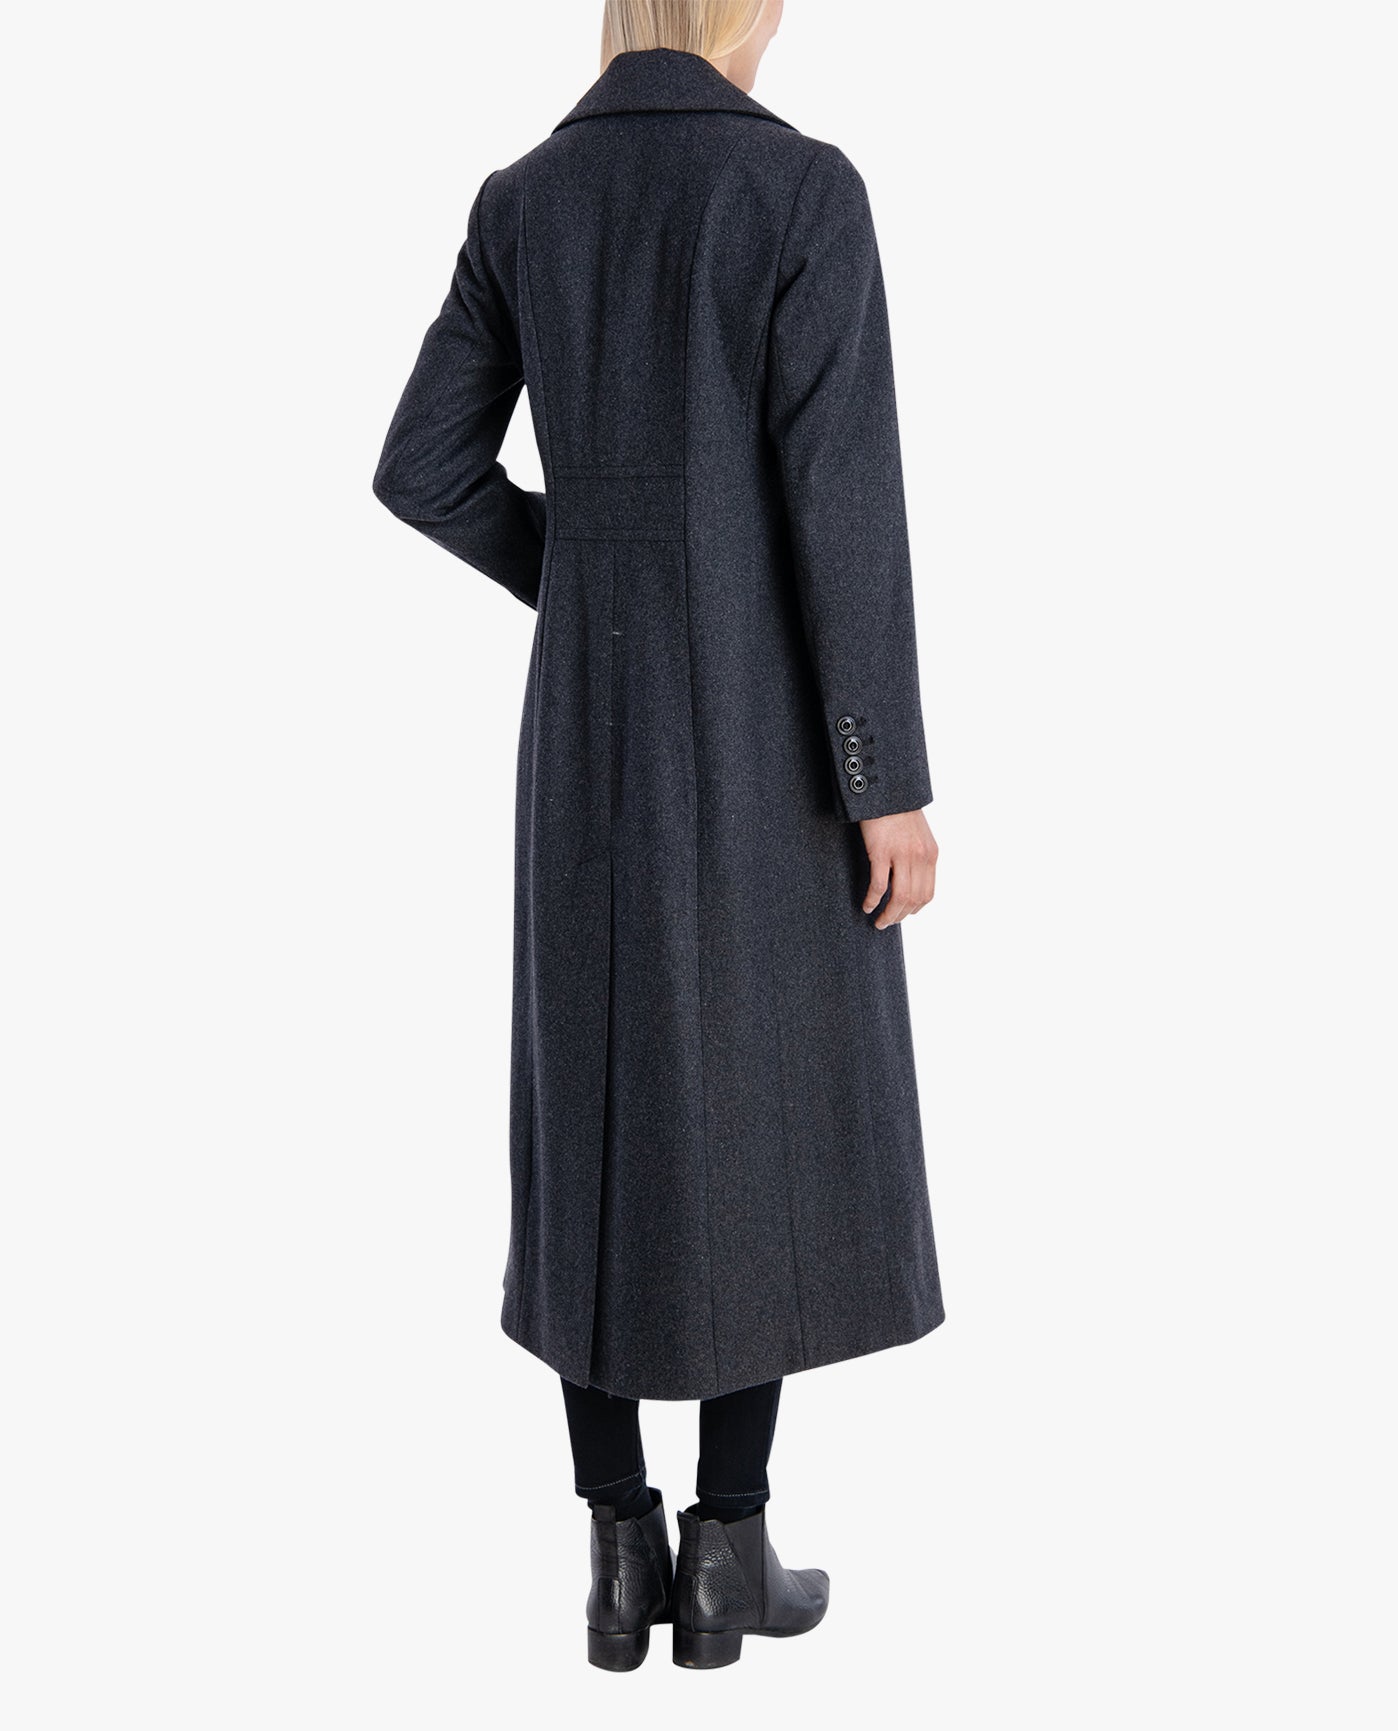 Back View Of SINGLE BREASTED MAXI PEACOAT | CHARCOAL